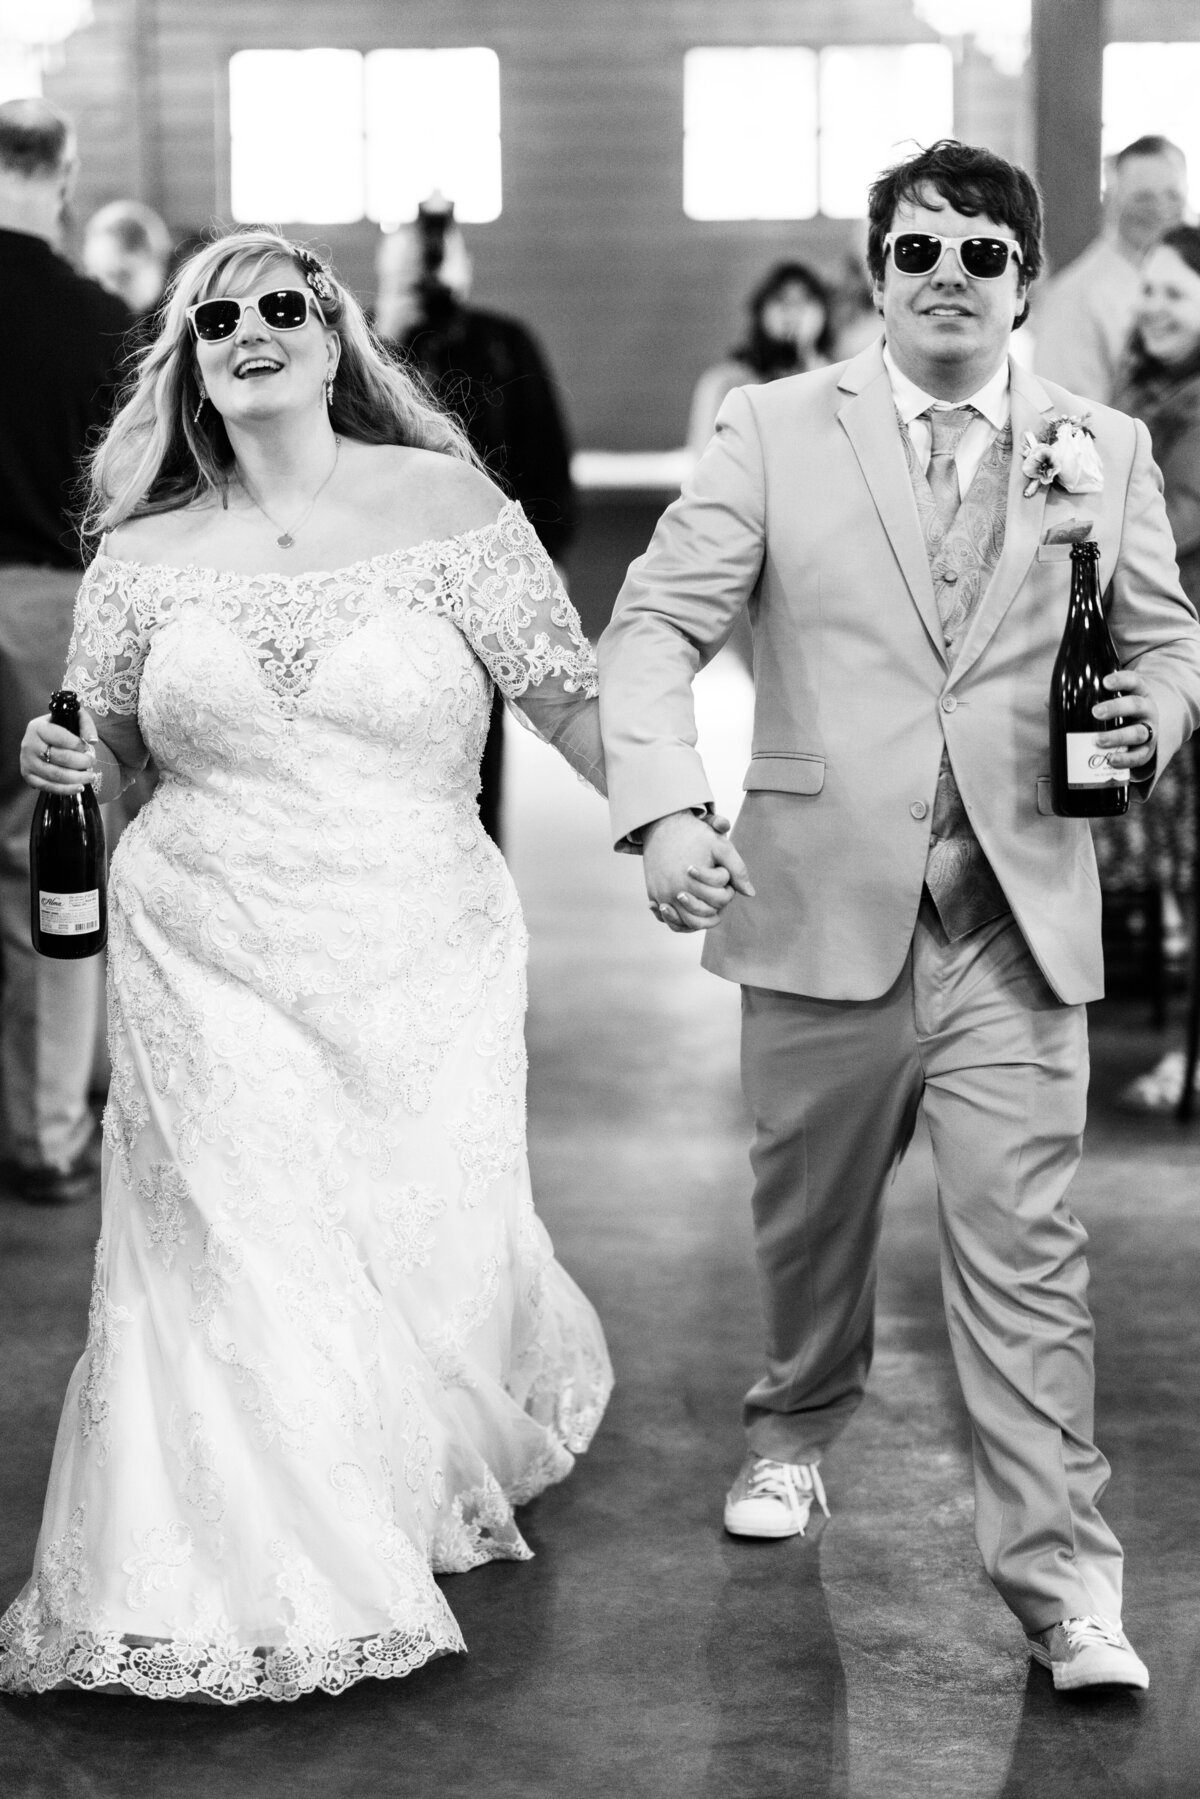 Bride and groom walk into wedding reception in sunglasses holding champagne bottles.